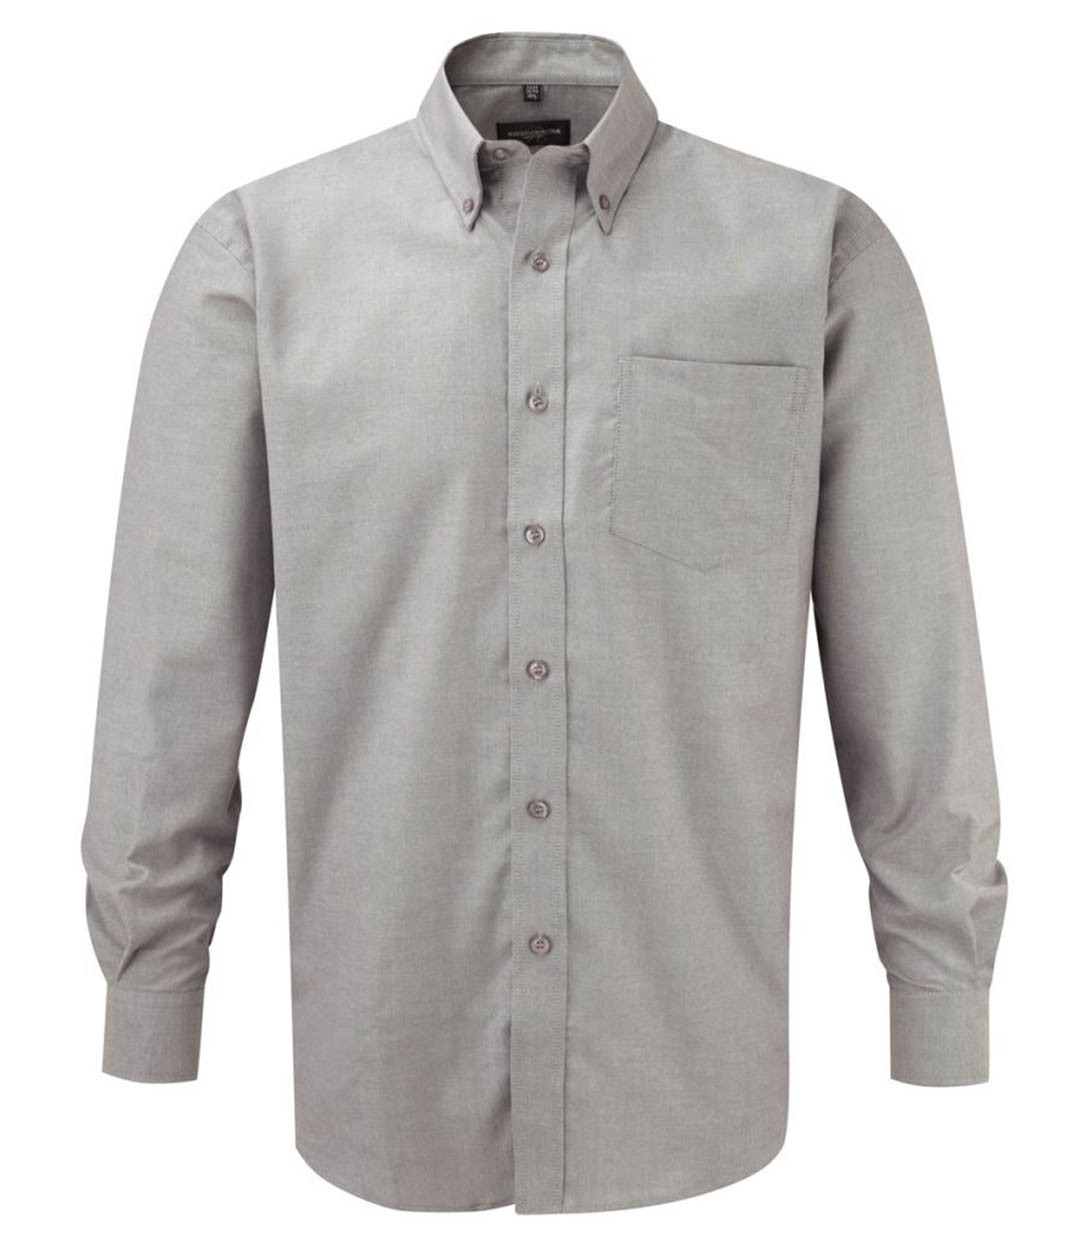 Russell Collection 932M Oxford Long Sleeve Shirt - Size 15.5-0